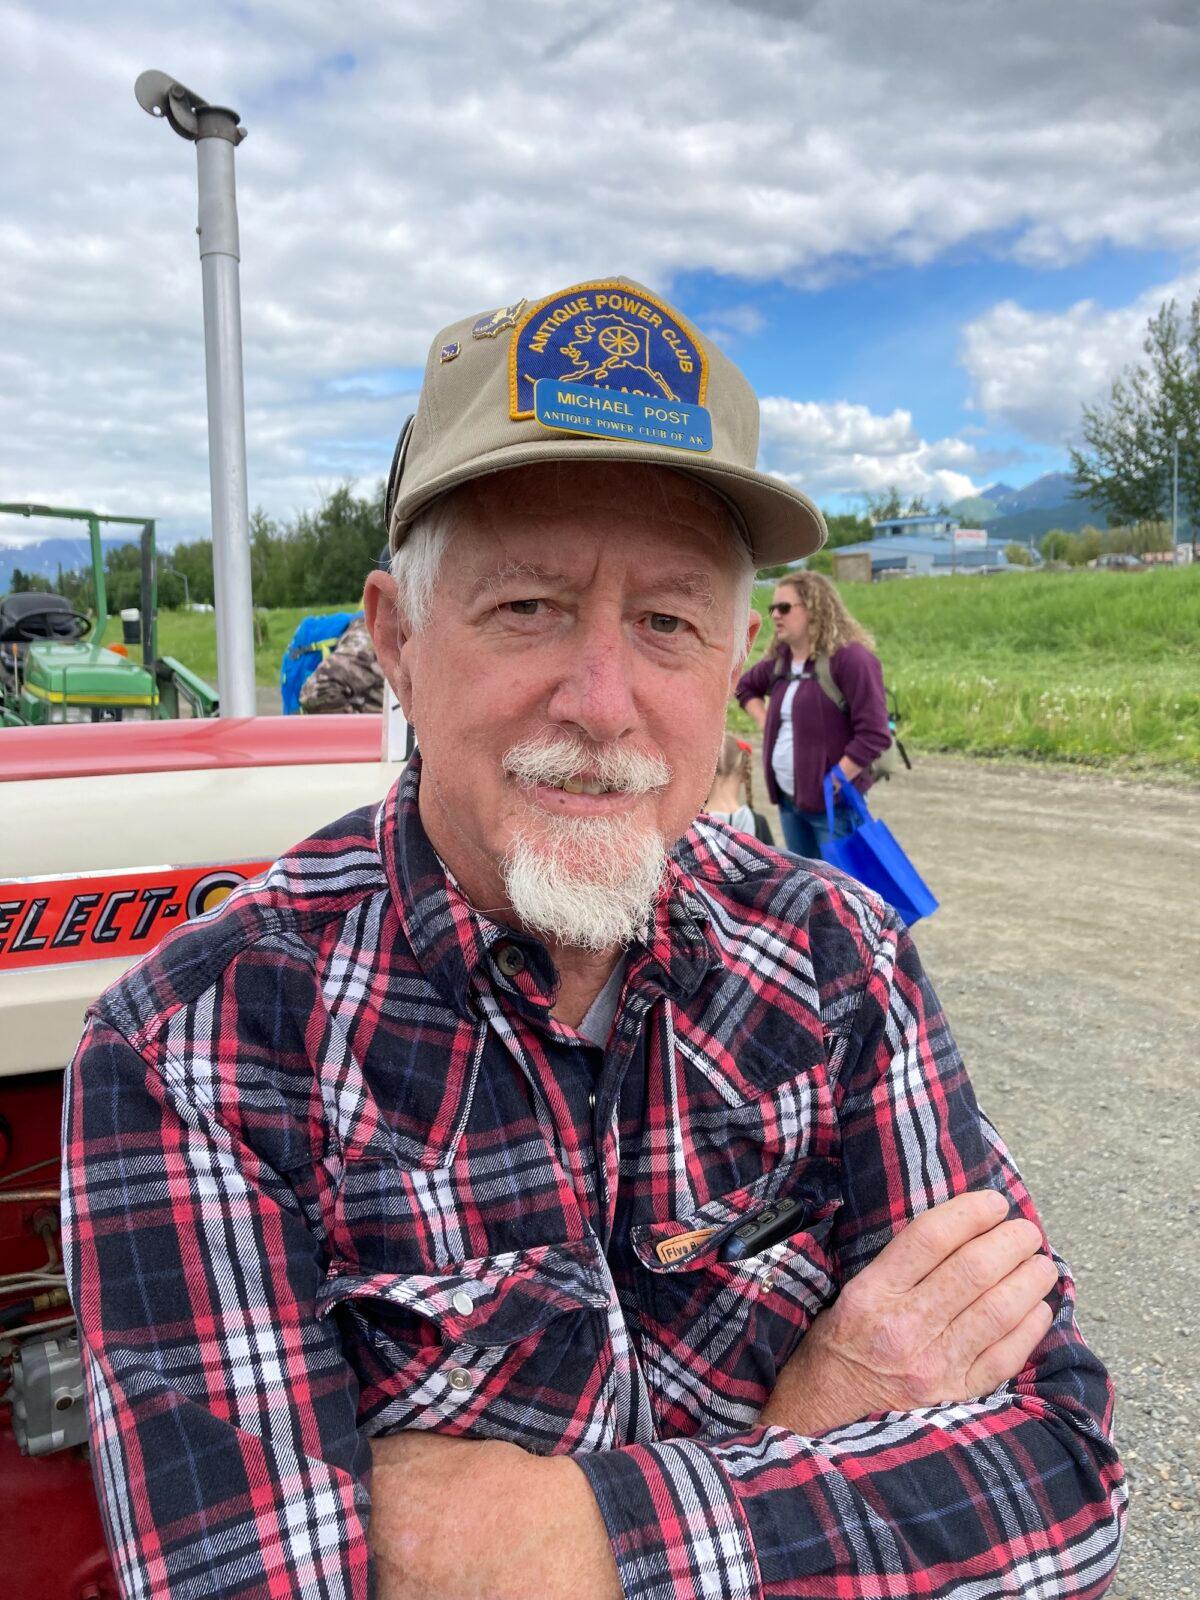 Michael Post of Palmer, Alaska, cast his vote for Republican Nick Begich in the special primary, saying Begich was the best candidate. (Allan Stein/The Epoch Times)